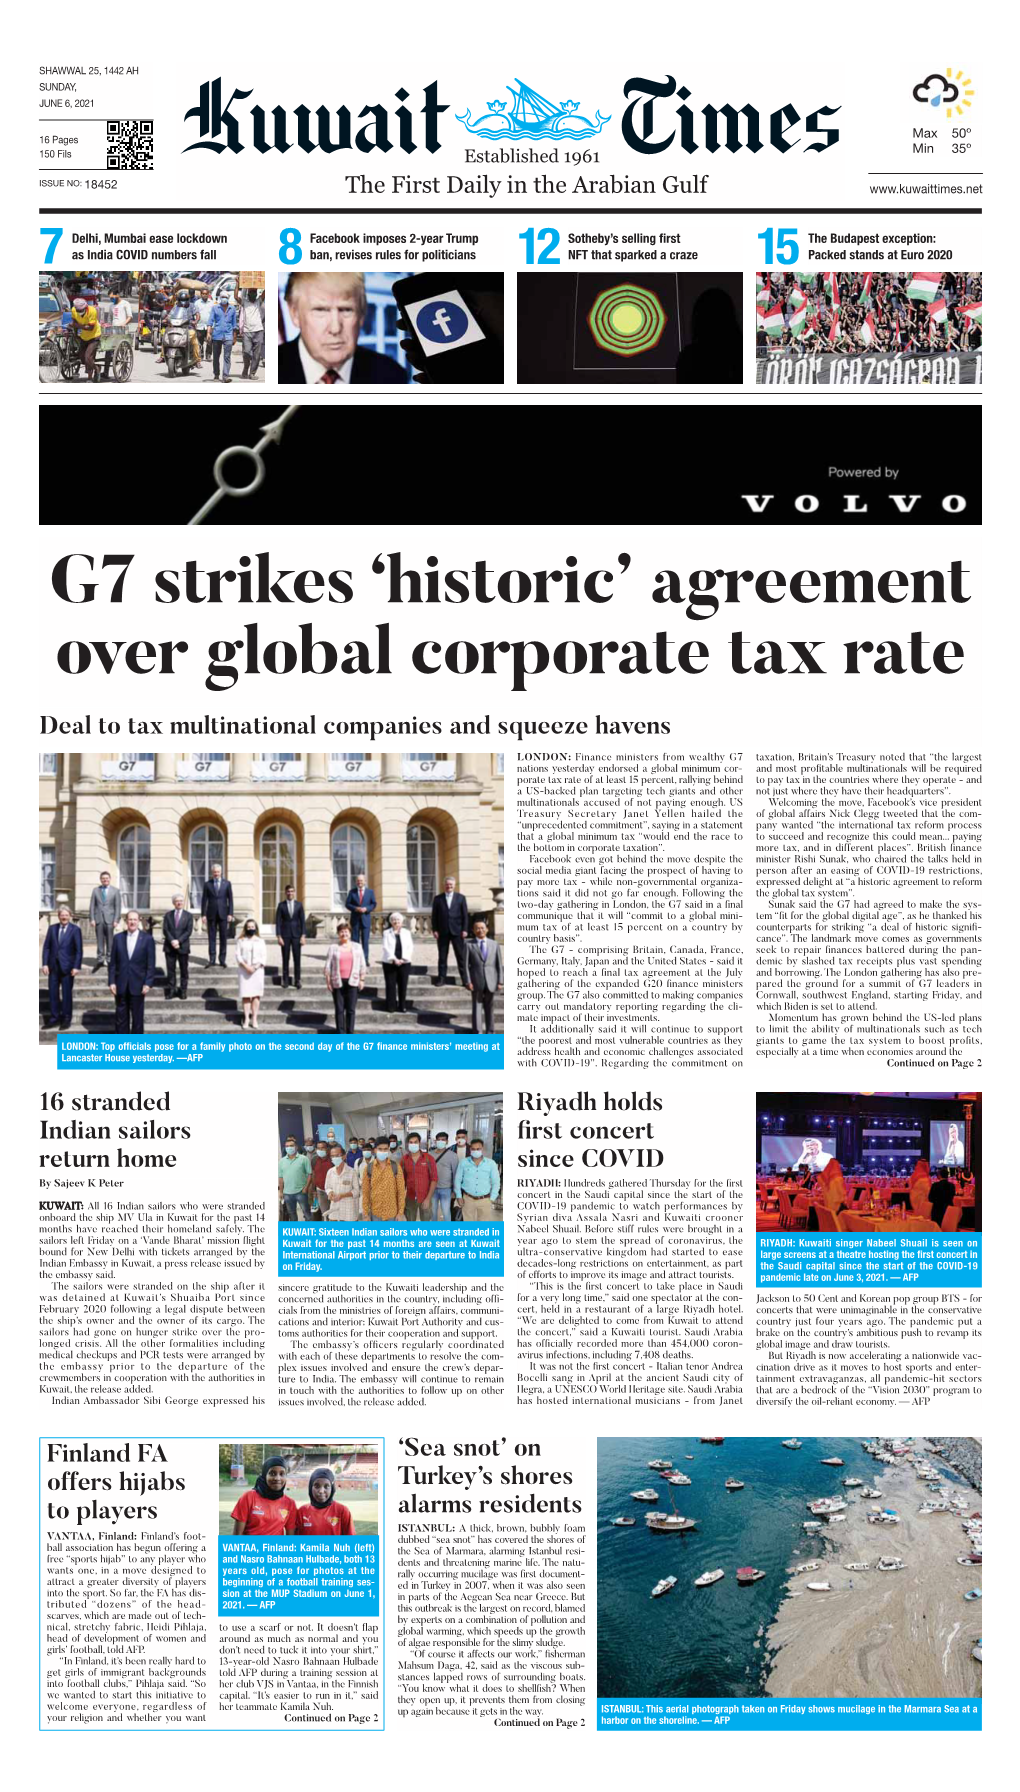 G7 Strikes 'Historic' Agreement Over Global Corporate Tax Rate